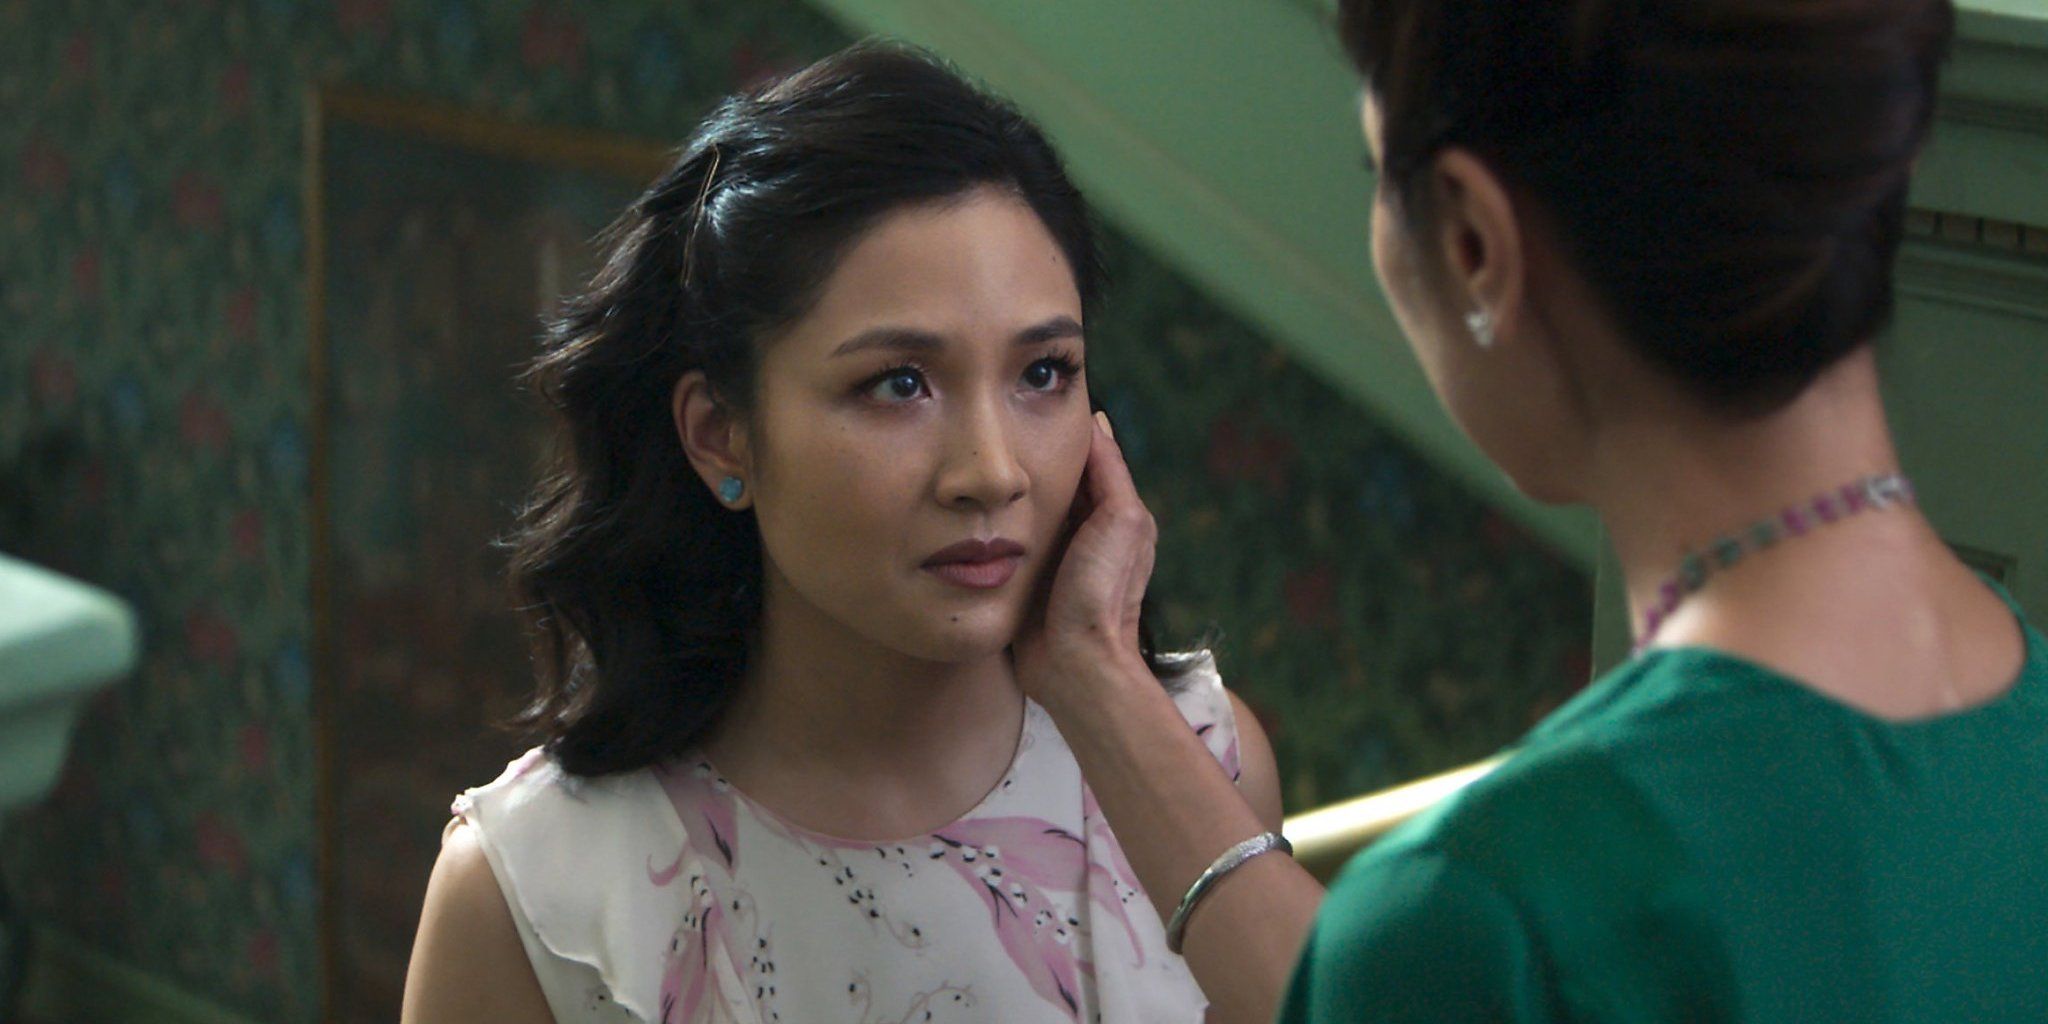 Michelle Yeoh places her hand on Constance Wu's face in 'Crazy Rich Asians'